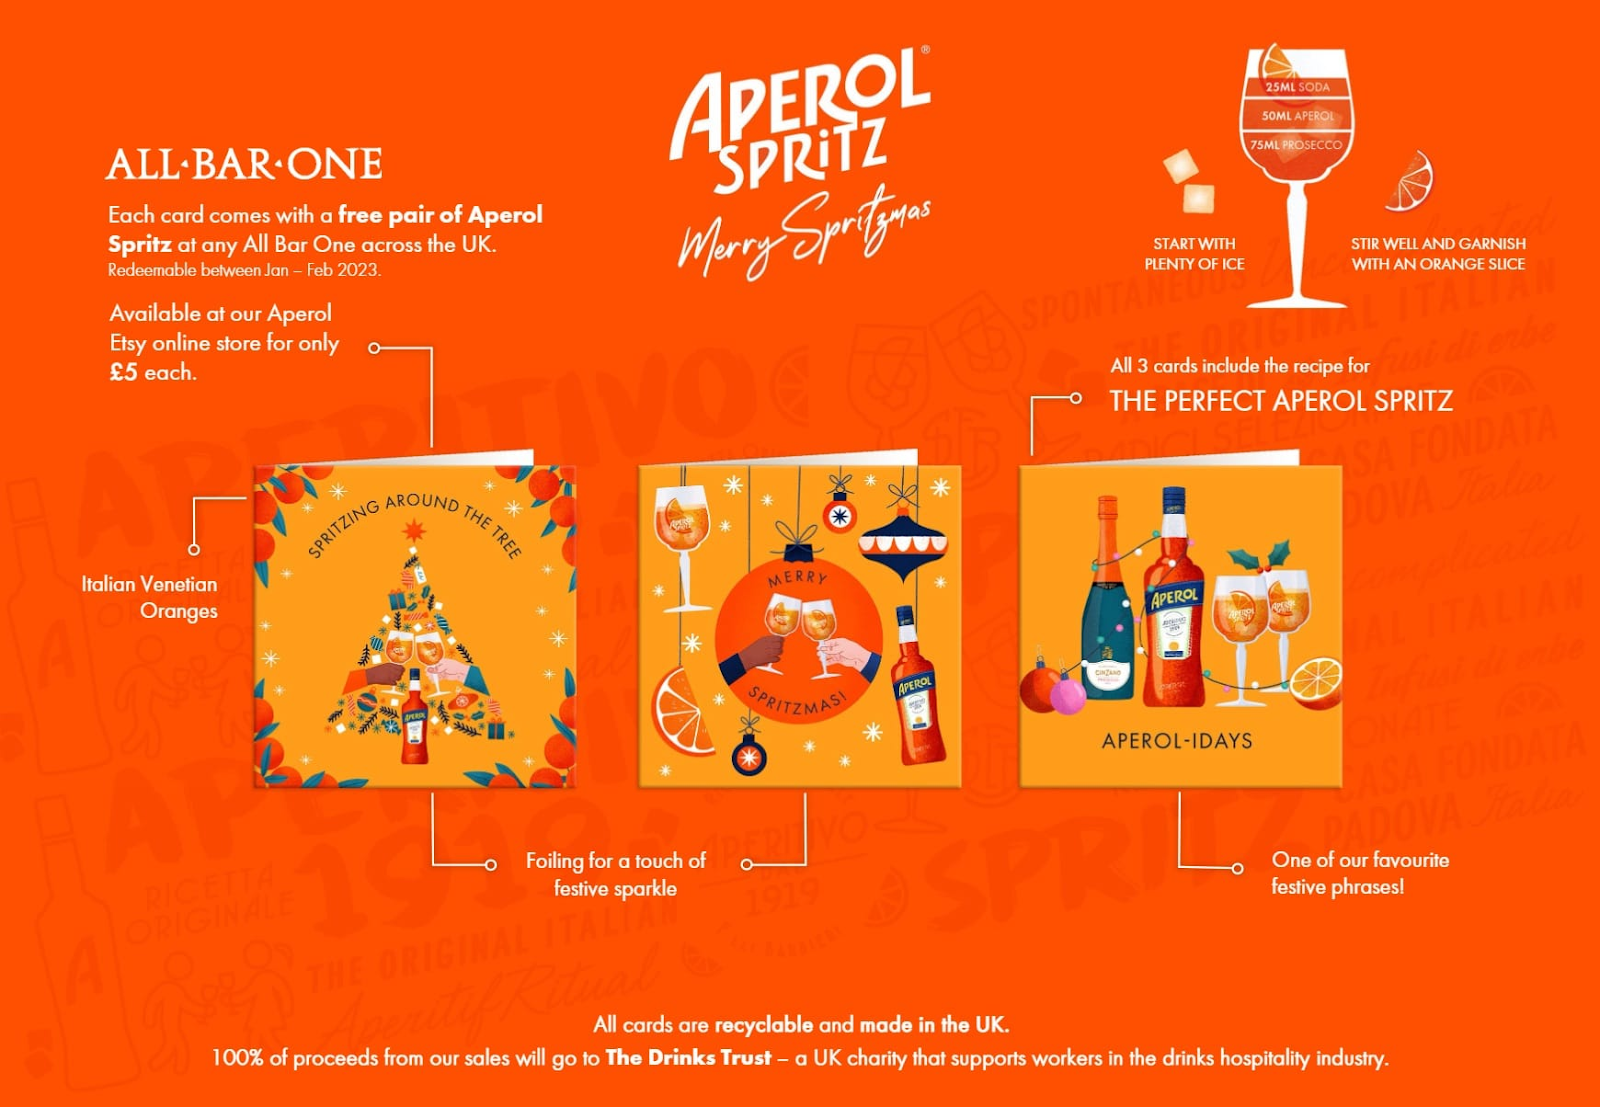 Aperol Spritz Greeting Card designs for a Christmas direct mail initiative